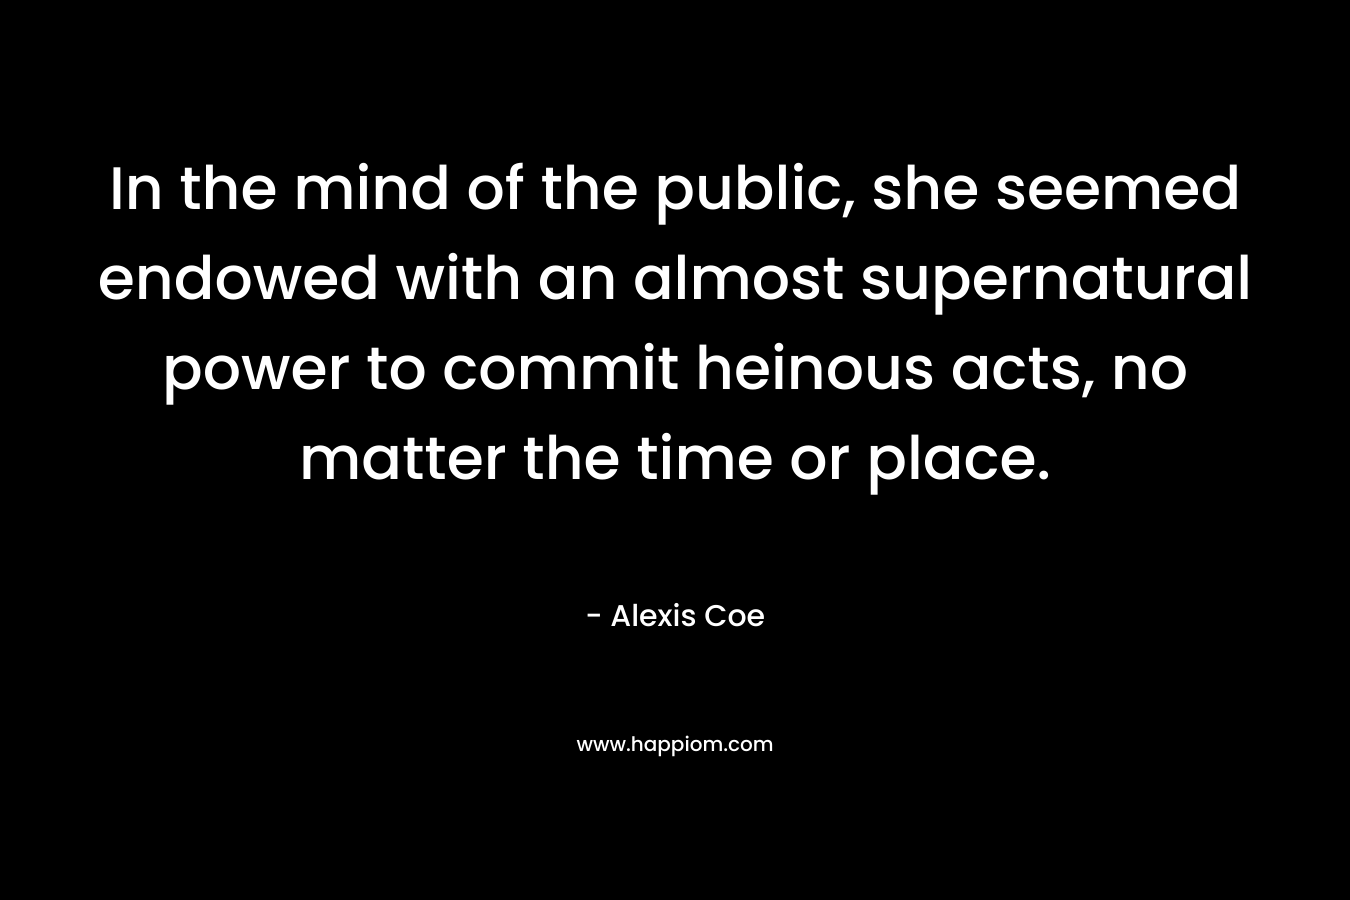 In the mind of the public, she seemed endowed with an almost supernatural power to commit heinous acts, no matter the time or place.